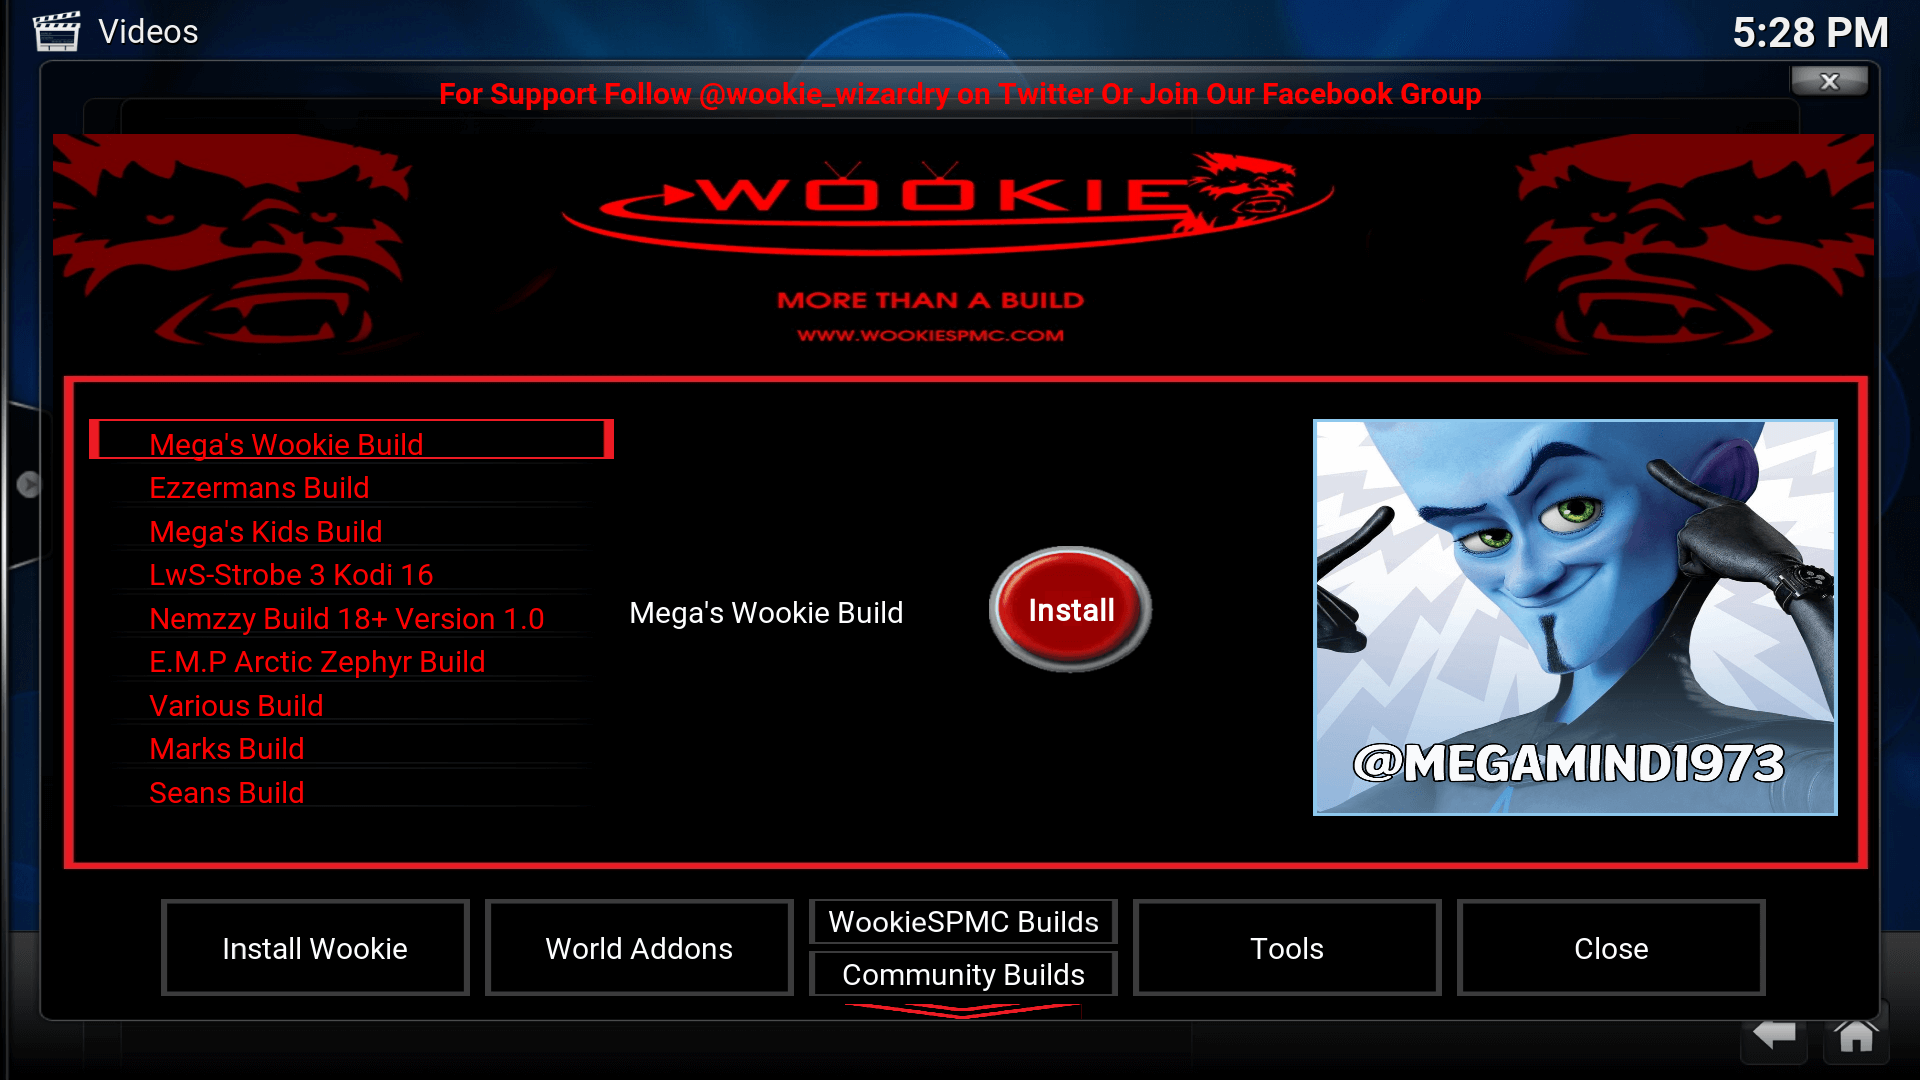 Update Review of Mega's Wookie Build - Great for Firesticks